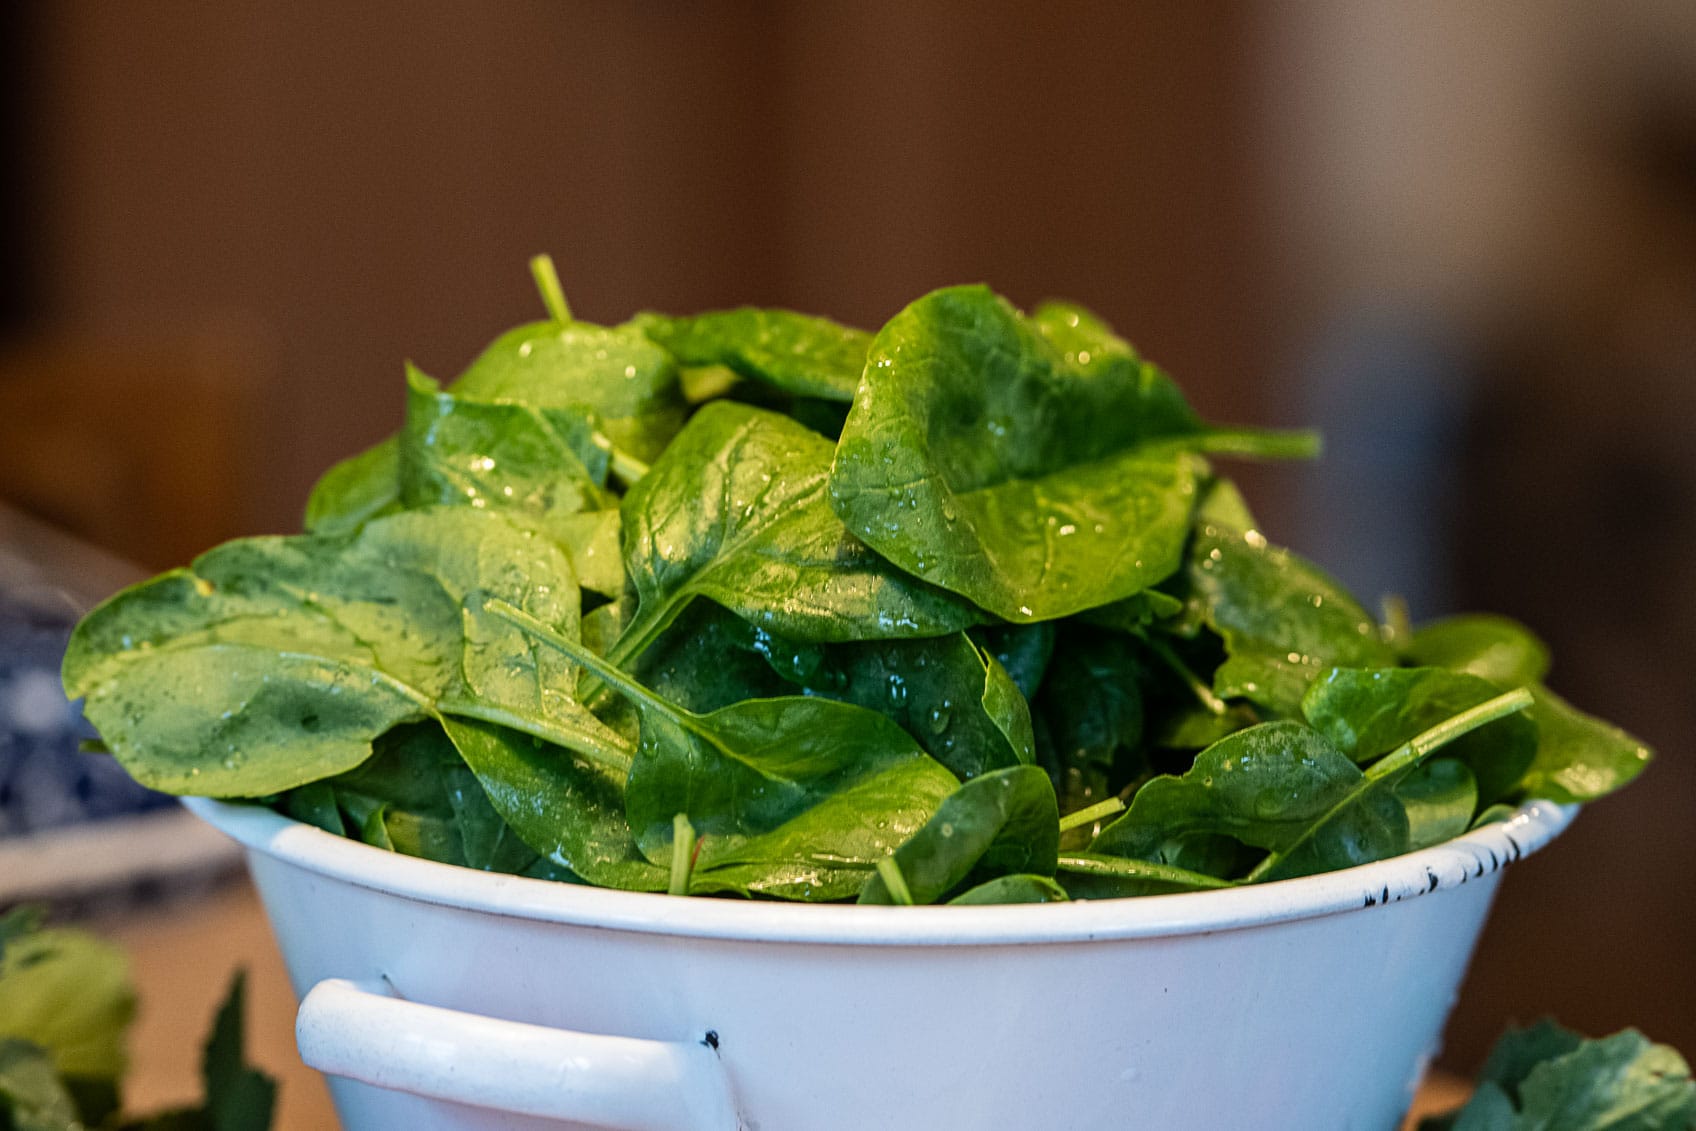 The fresh spinach leafs in a bowl on a table